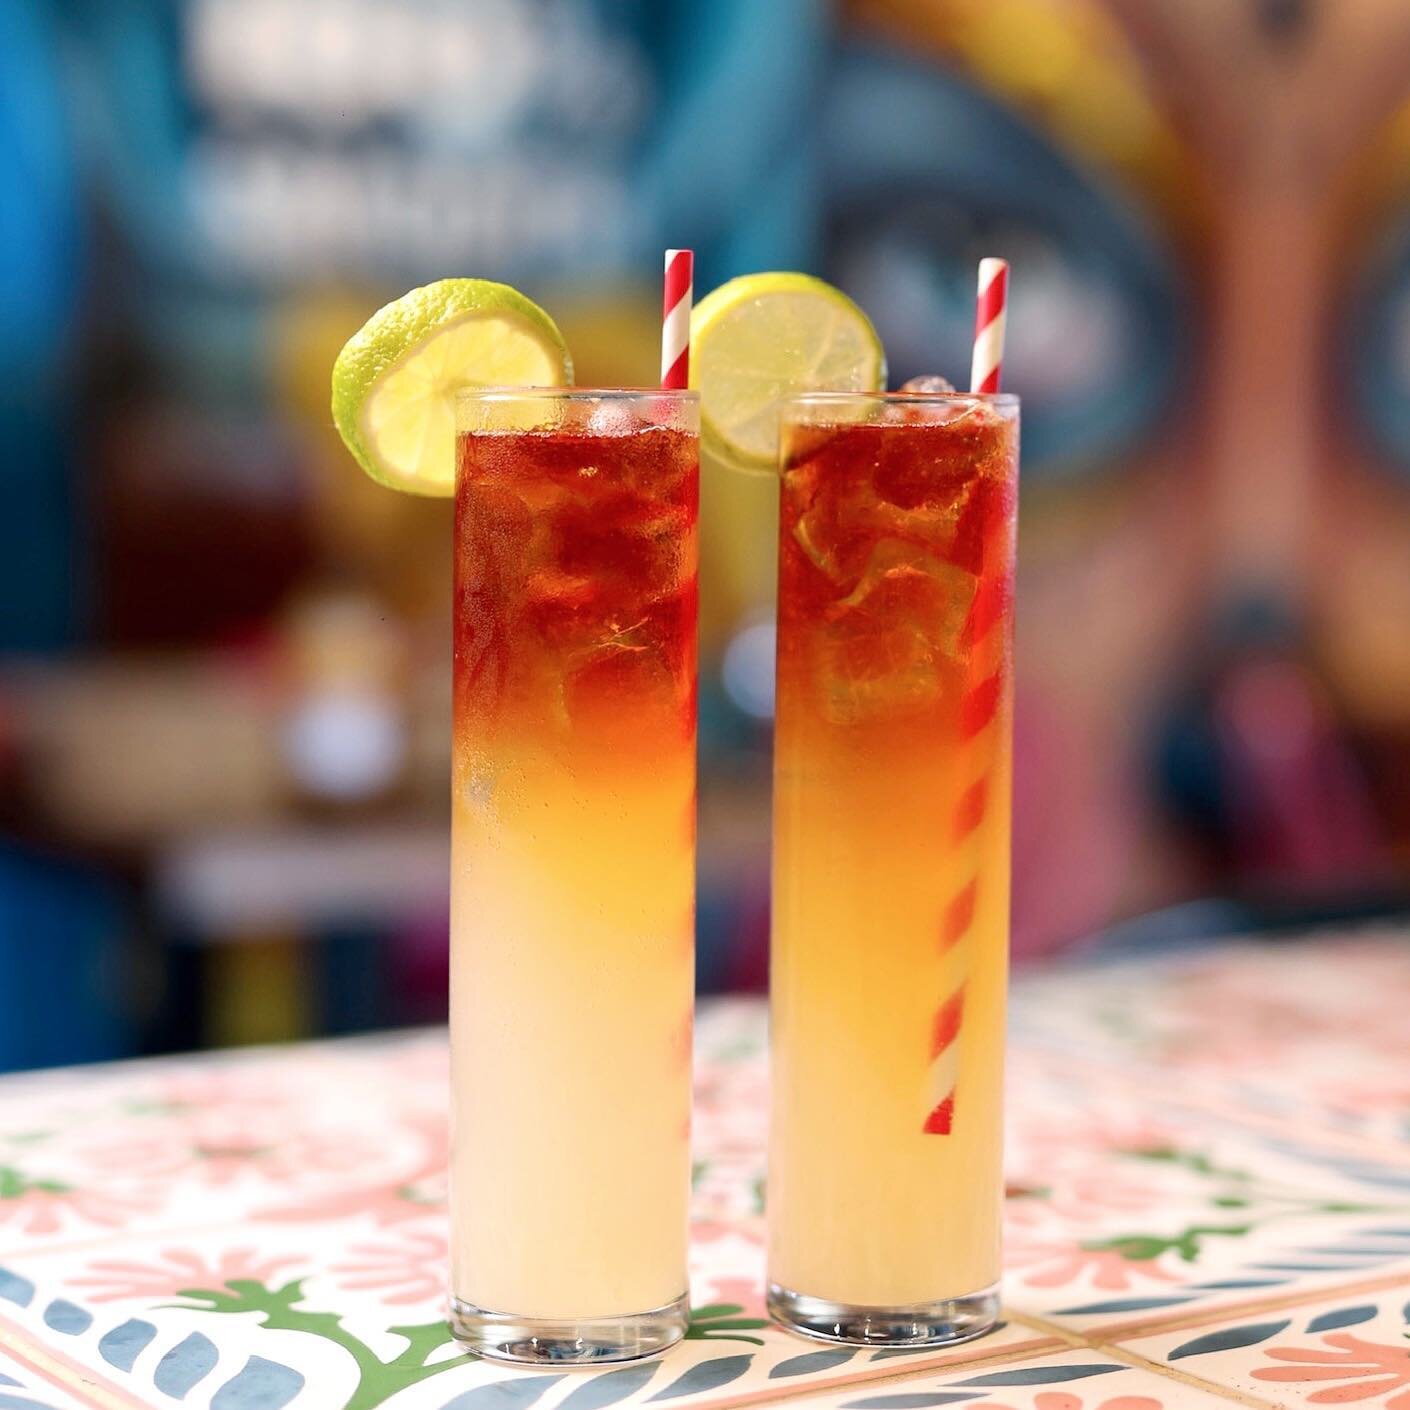 Looking for 2-4-1 cocktails on a Saturday night? Don&rsquo;t worry, we&rsquo;ve got you🤝 

2-4-1 cocktails all night long, right here at Bonita&rsquo;s🙌🤩

Walk-ins welcome or book via the link in our bio to secure your table!🍹